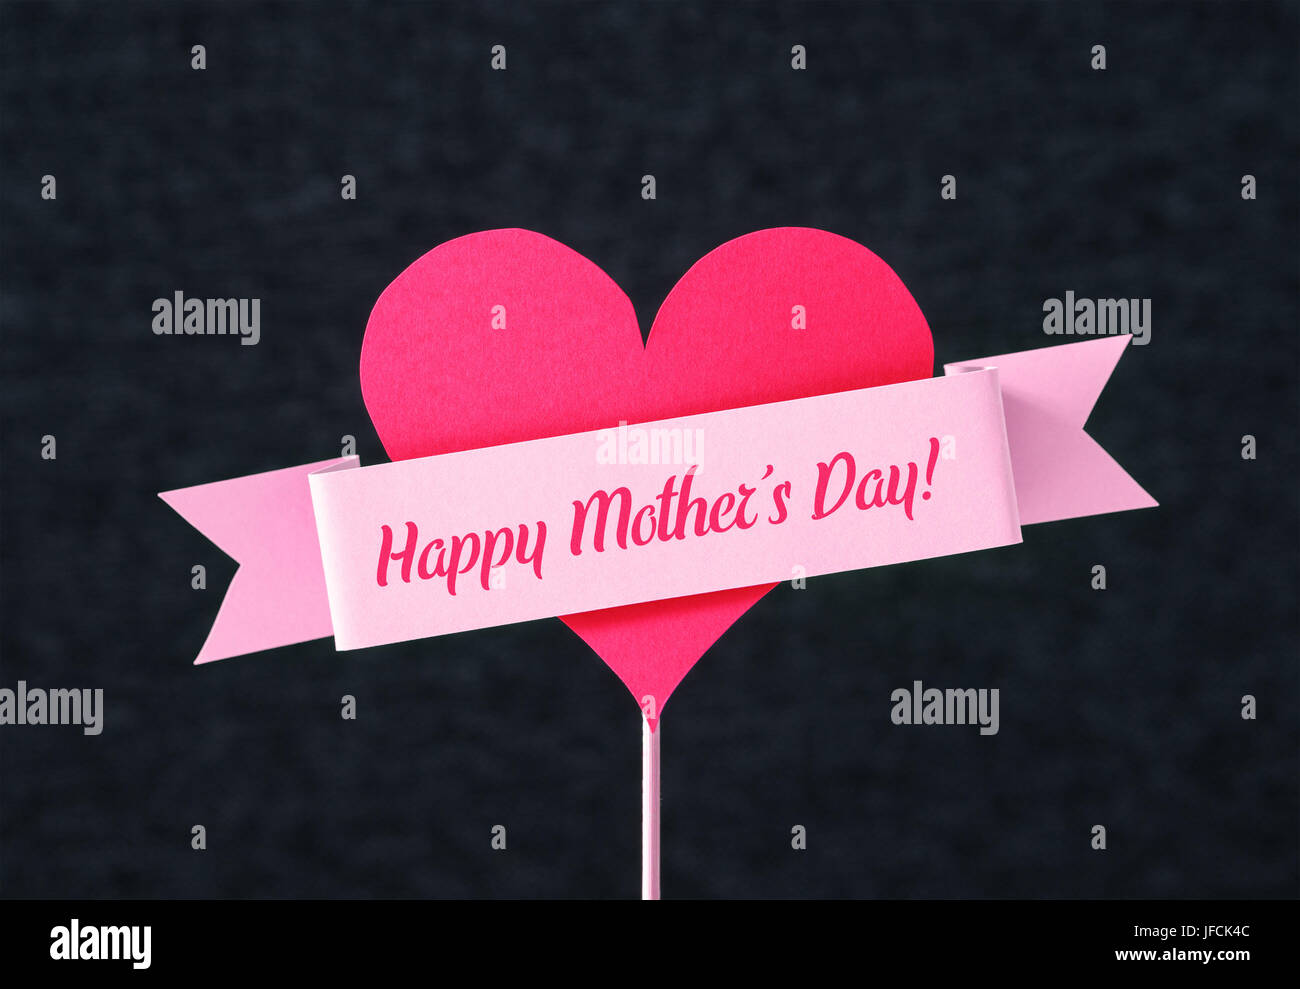 Happy Mother's Day text on a ribbon and red heart shape cut from cardboard on wooden stick. Nice simple greeting design for Mothers Day card. Stock Photo